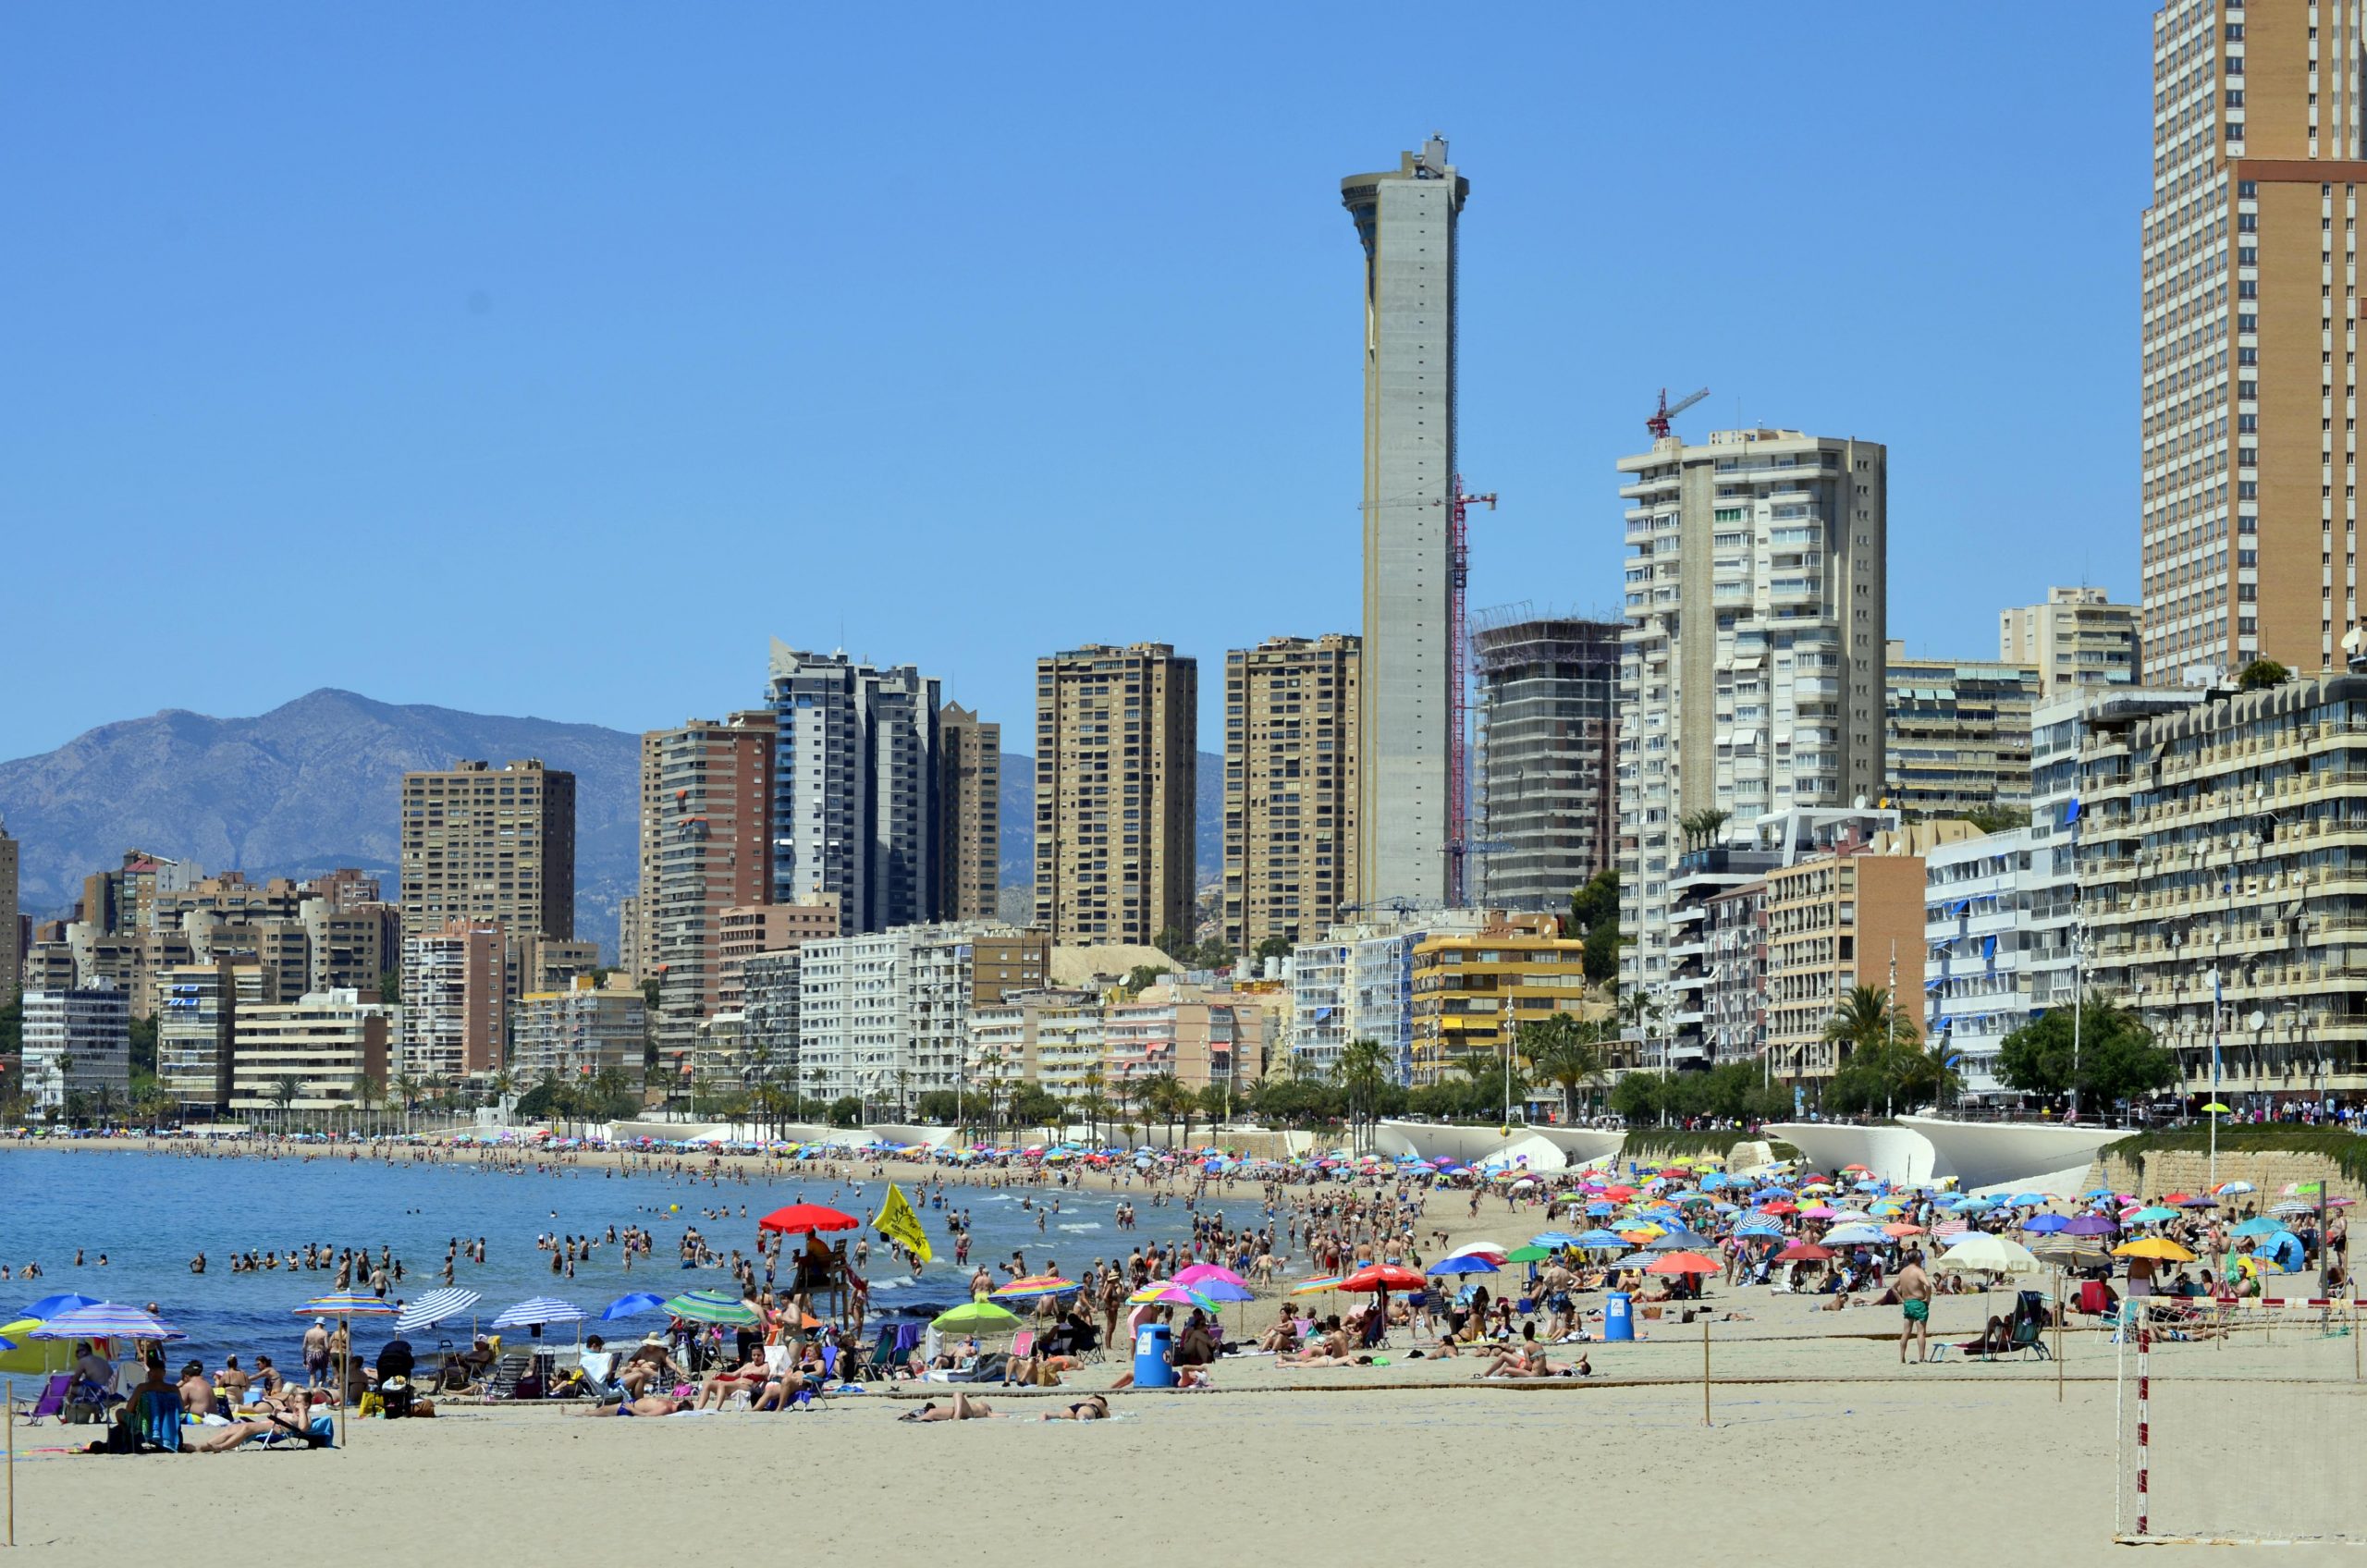 Body of woman ‘aged between 60 and 70’ is found floating in the waters off Spain’s Benidorm